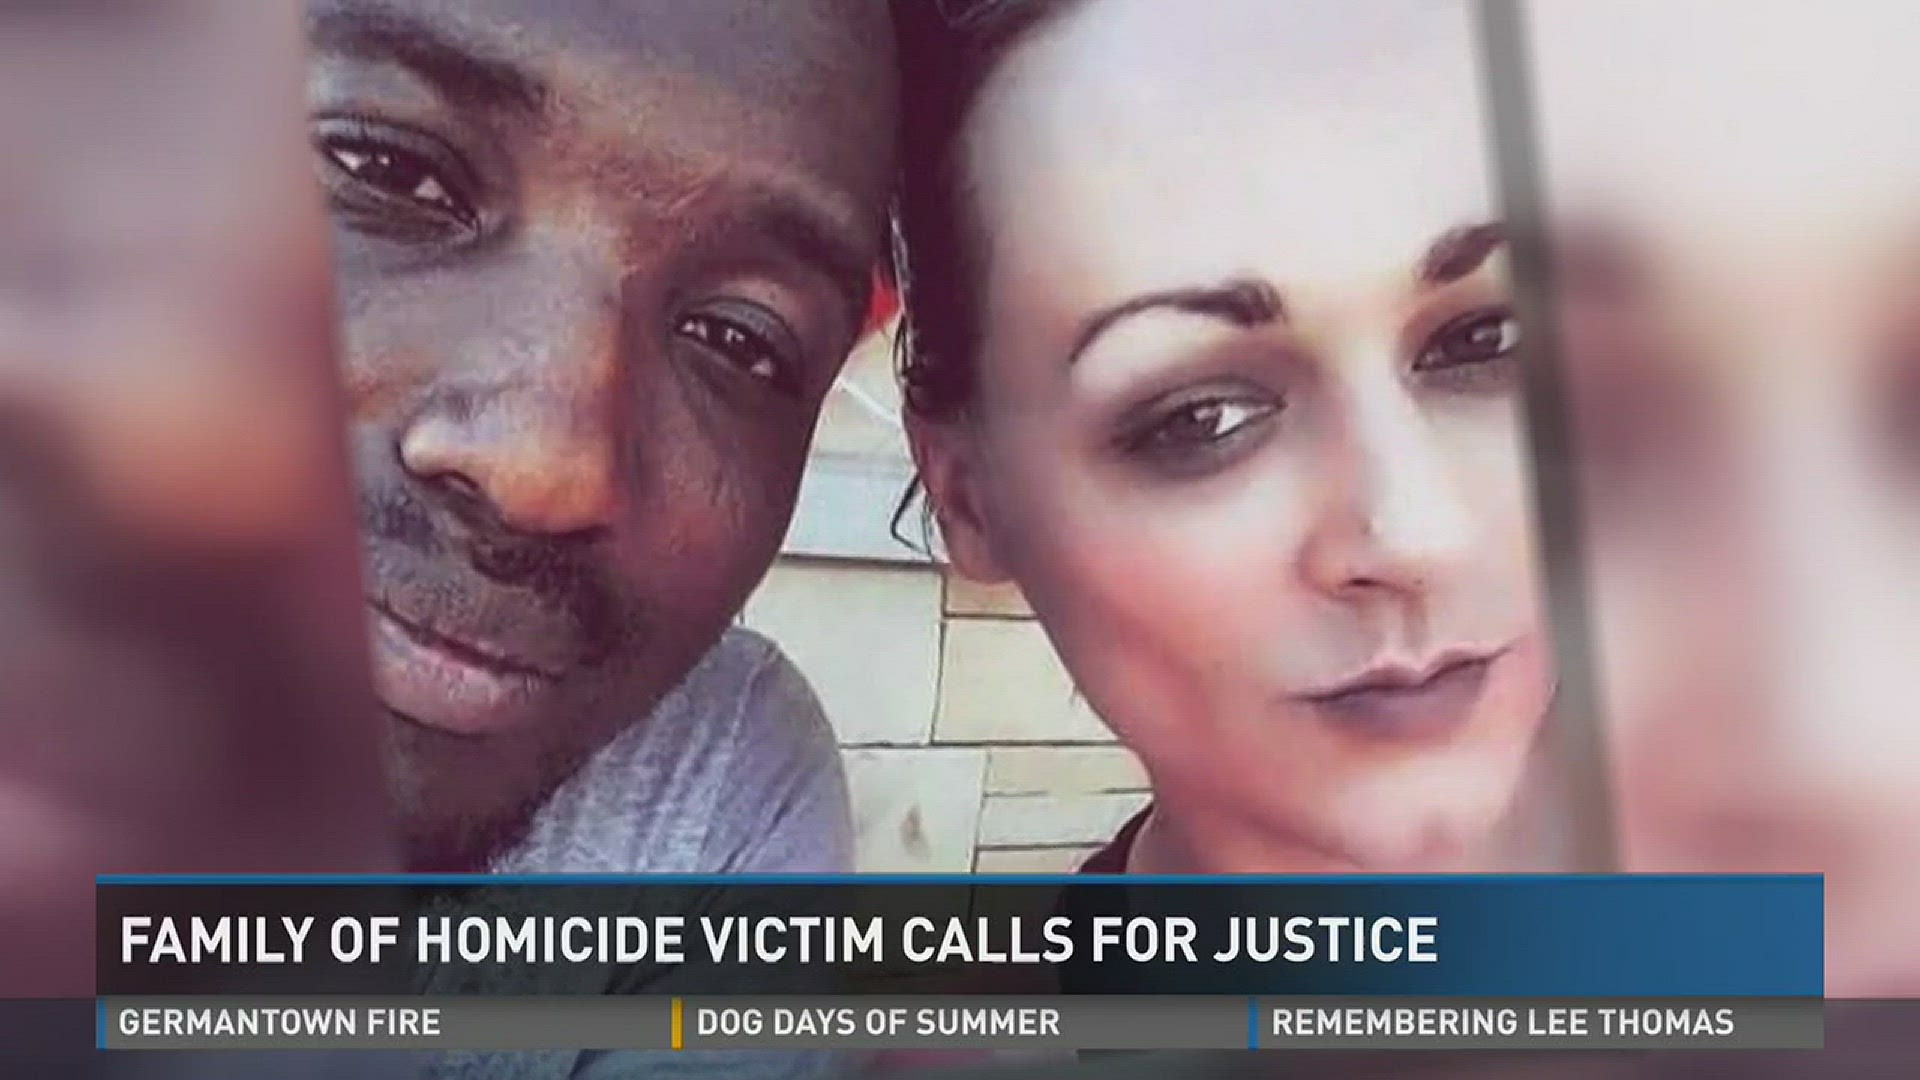 Family of homicide victim calls for justice